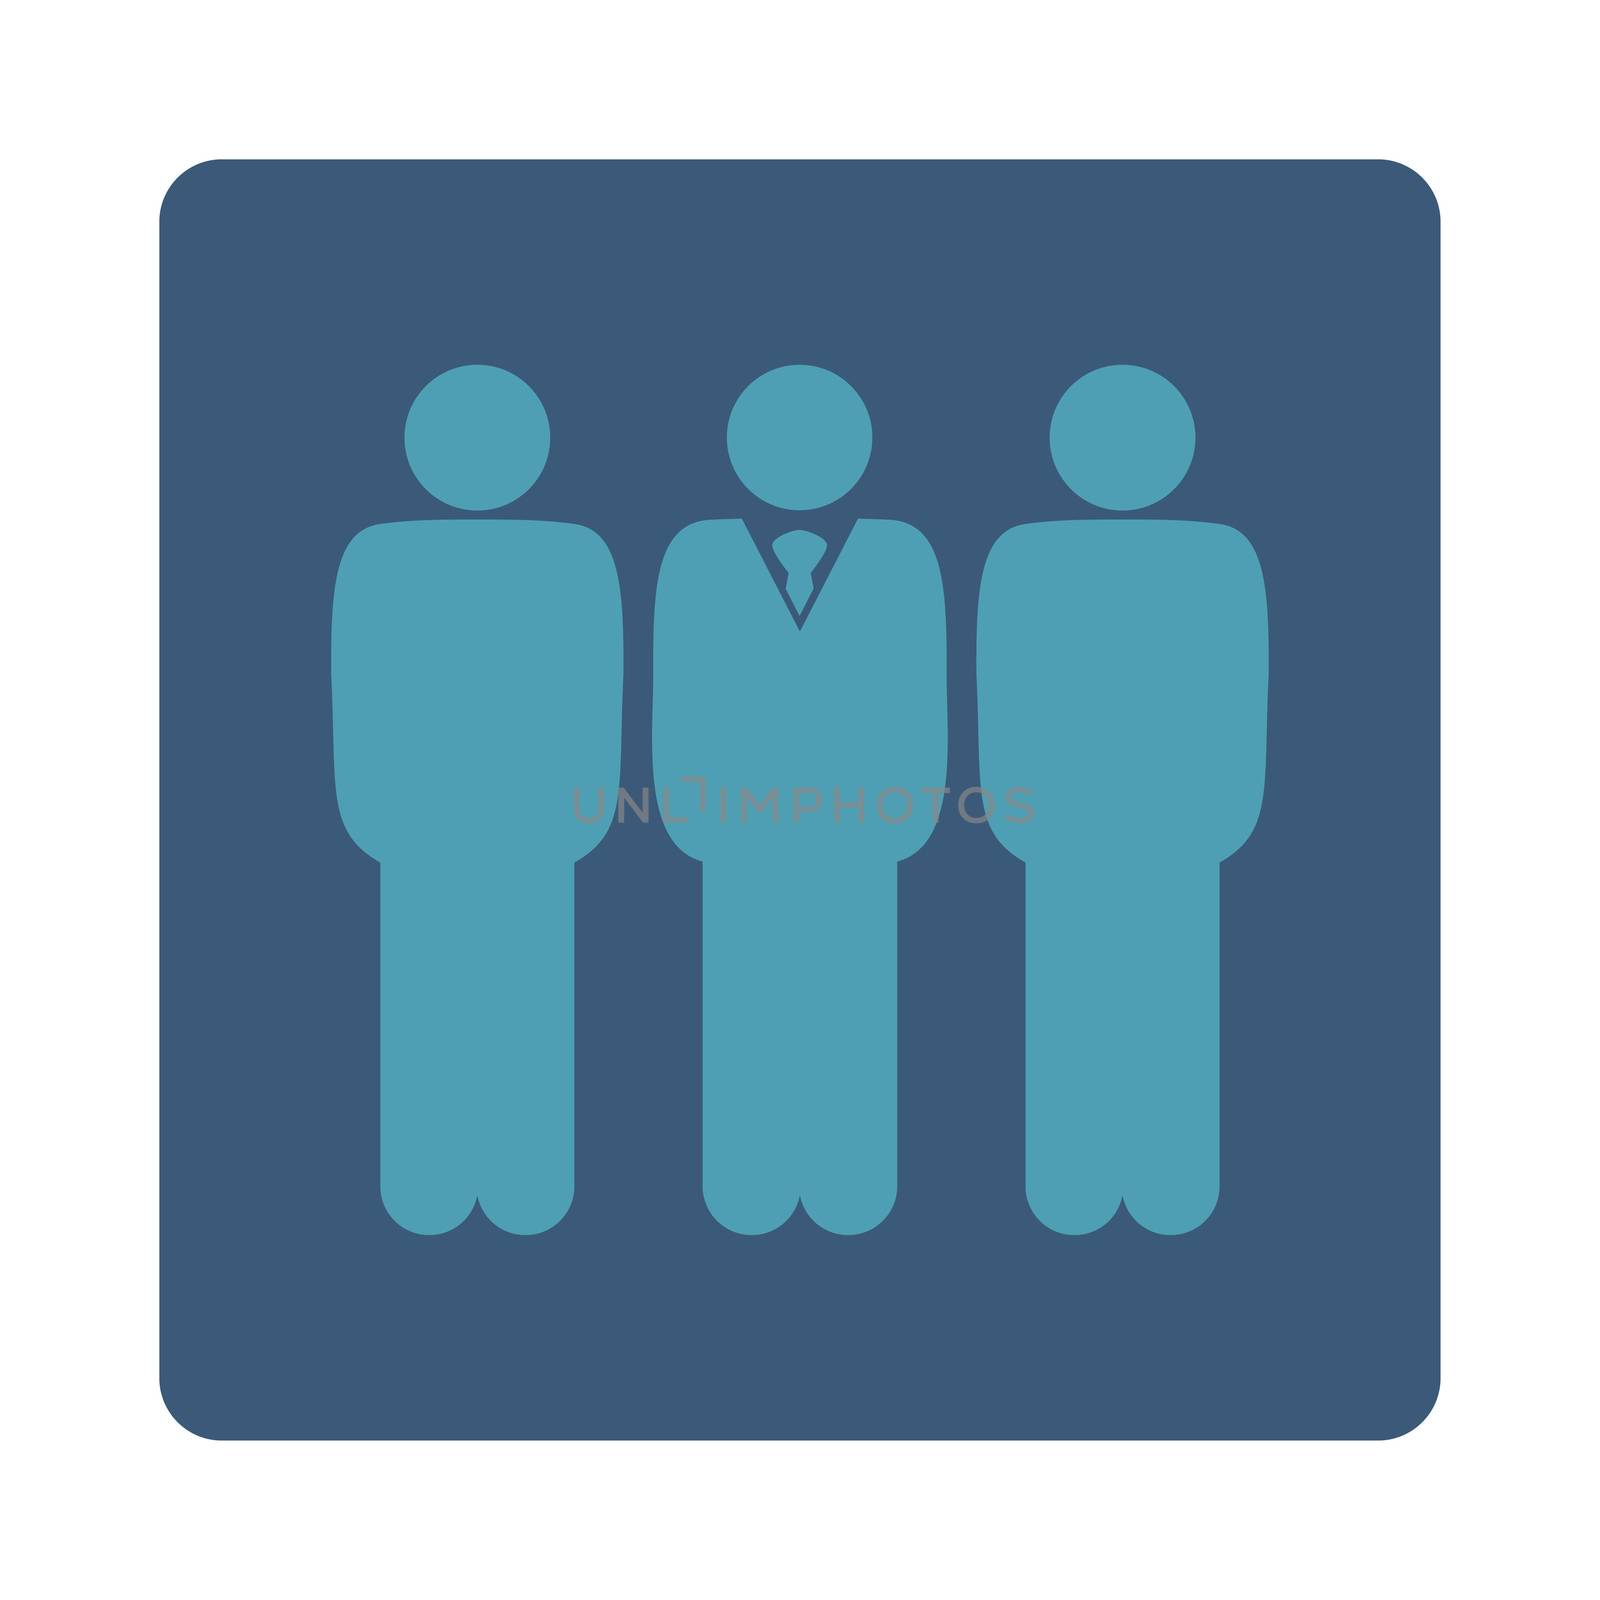 Management icon. This flat rounded square button uses cyan and blue colors and isolated on a white background.